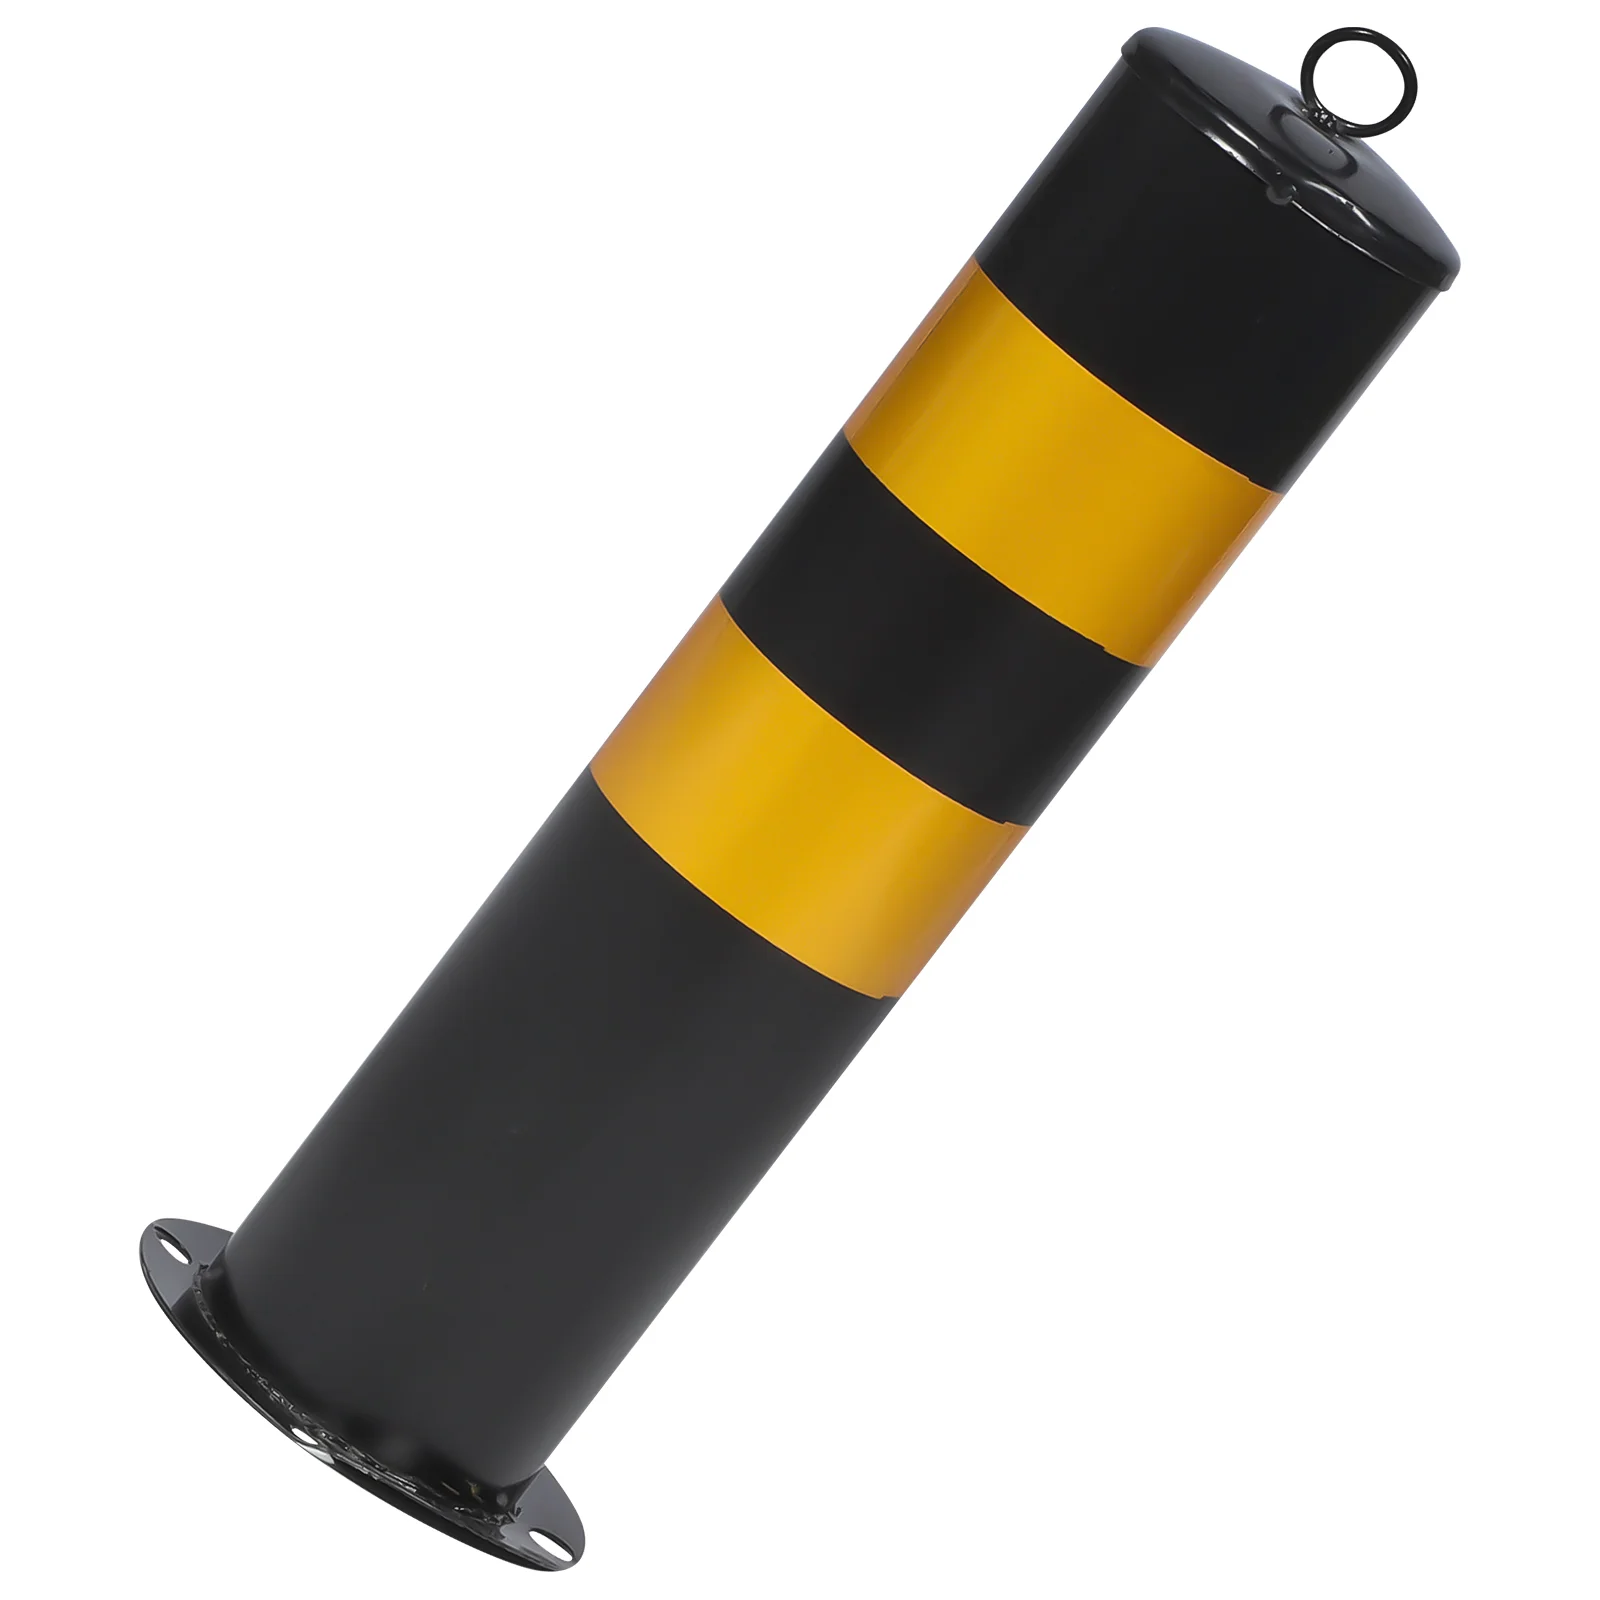 

Warning Post Barricades Metal Fence Gate Column Safety The Parking Bollards Barrier Stainless Steel Driveway Road cones